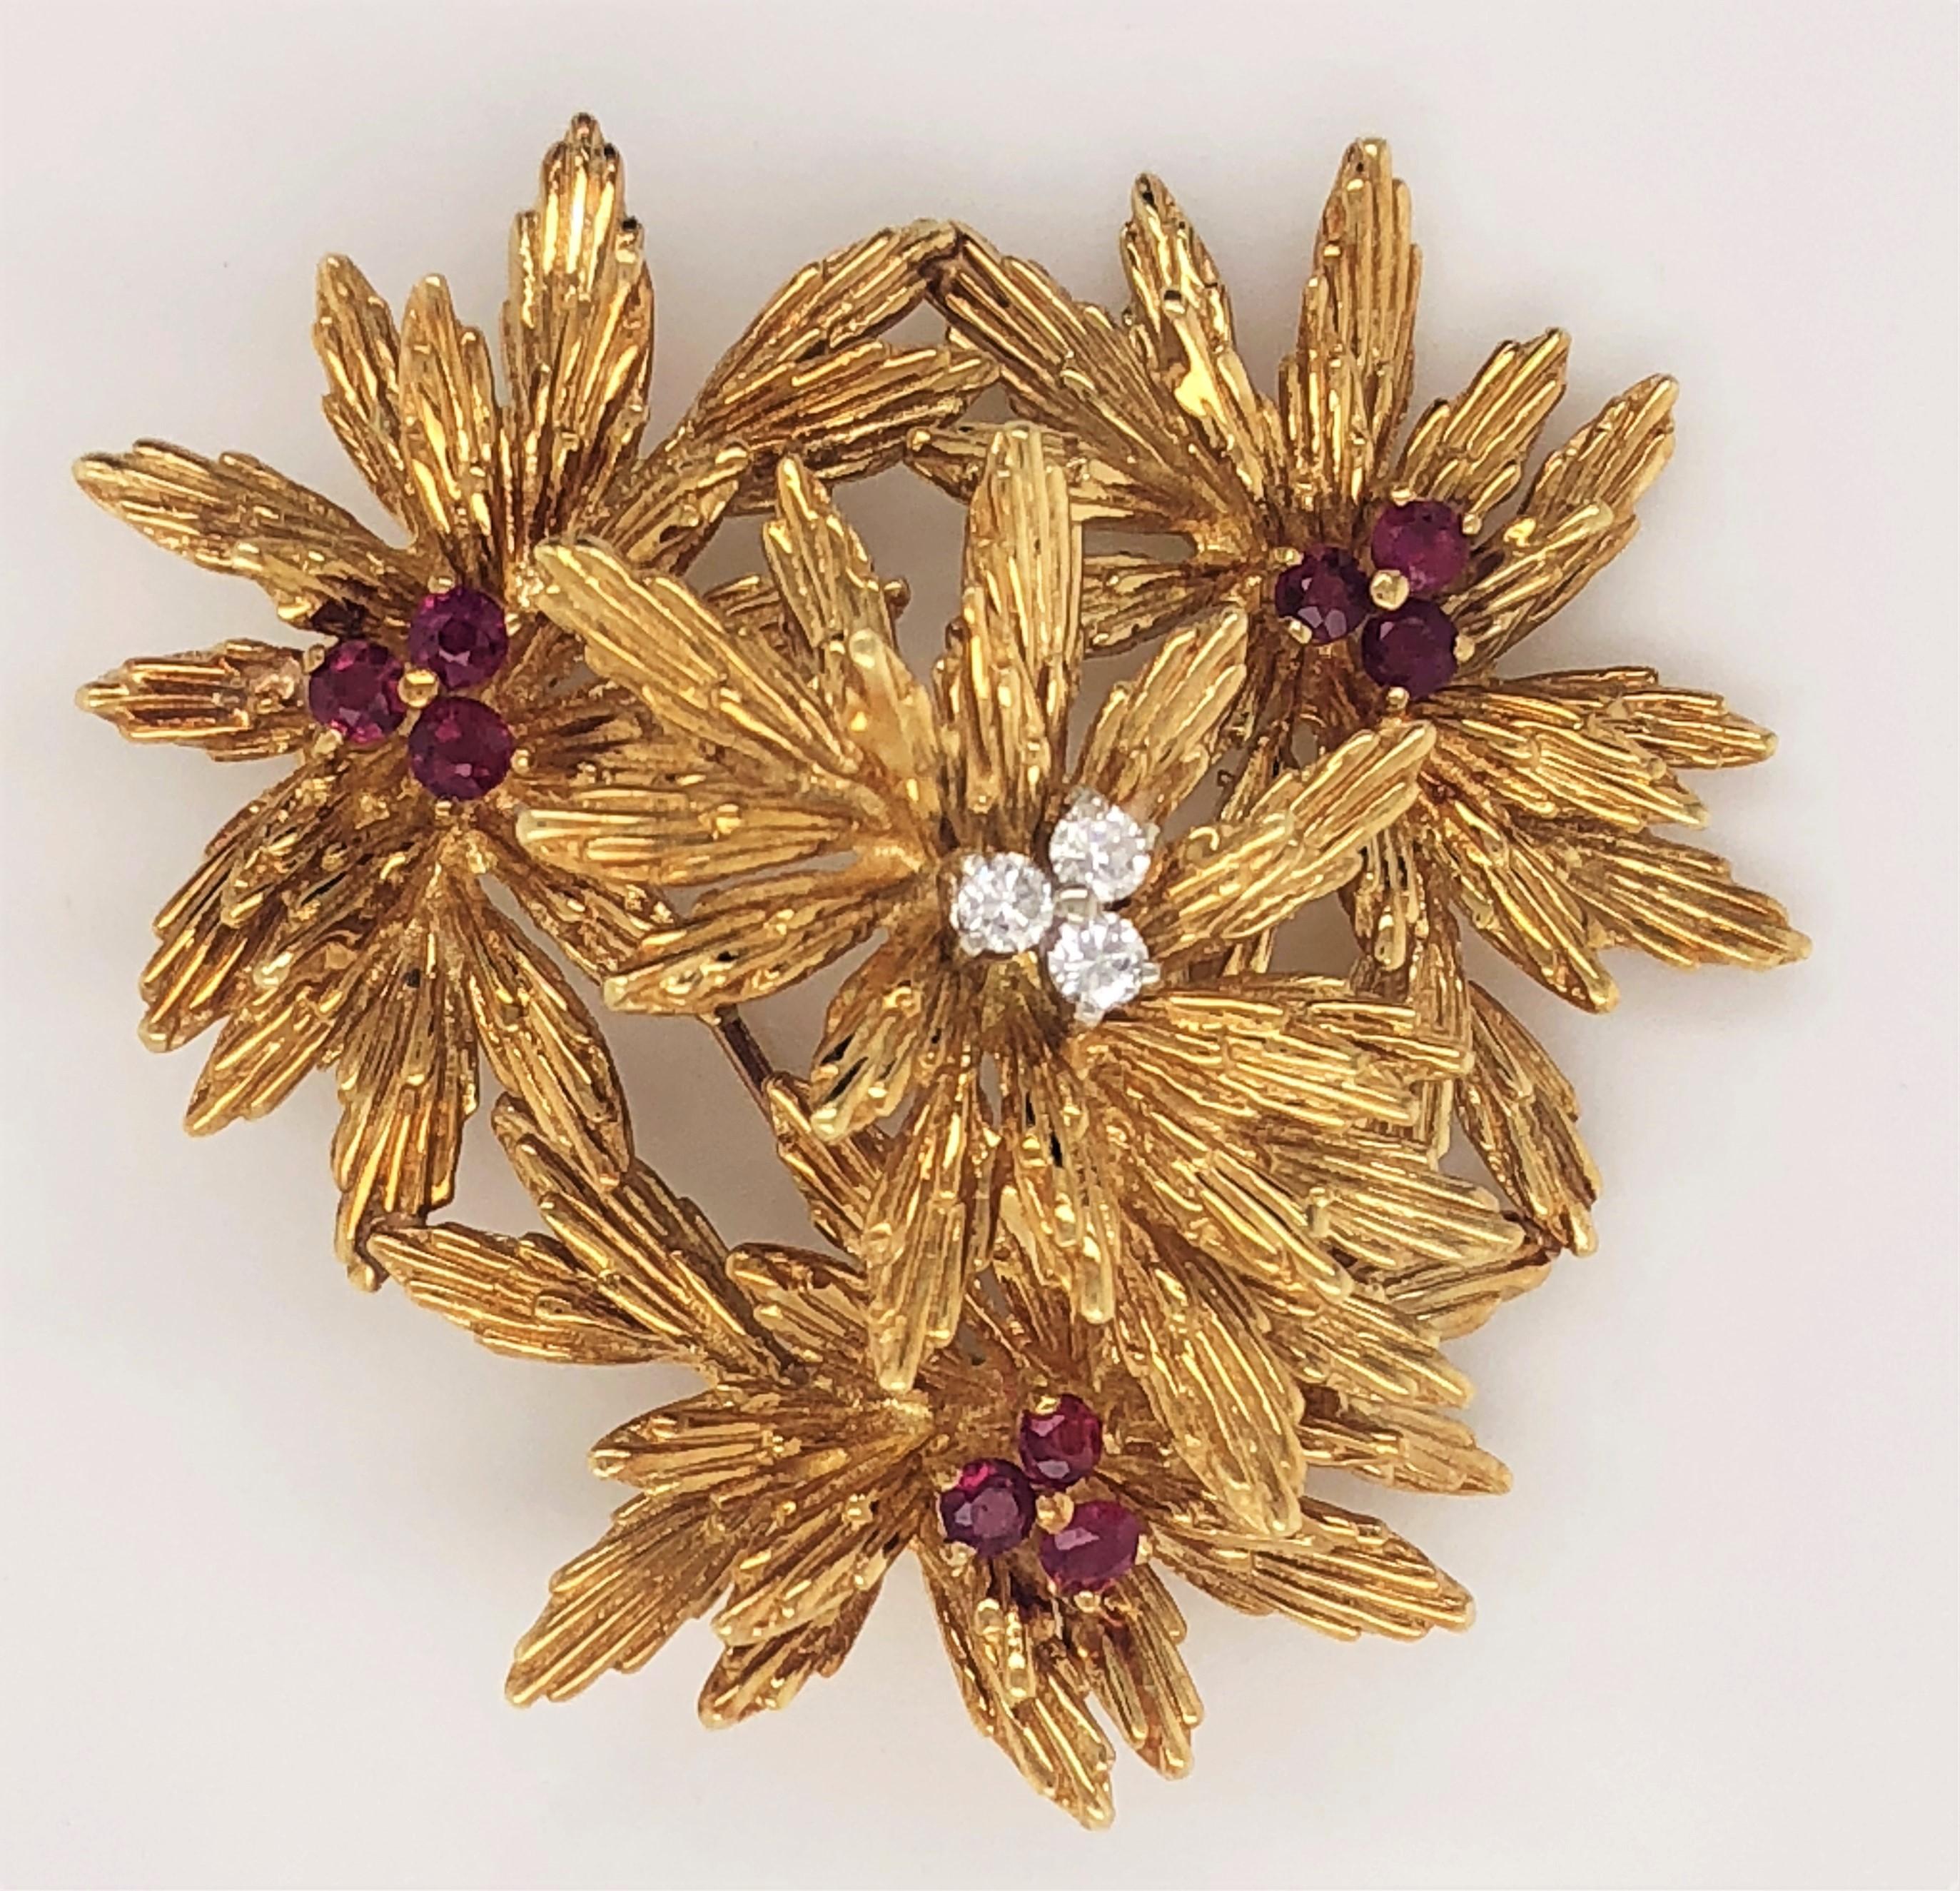 A chrysanthemum inspired floral bouquet in bright eighteen karat 18k yellow gold create this cheerful brooch from the 1960's Collection by Tiffany & Co. Each burst is carefully hand-tooled chased with texture details on the petals to create this